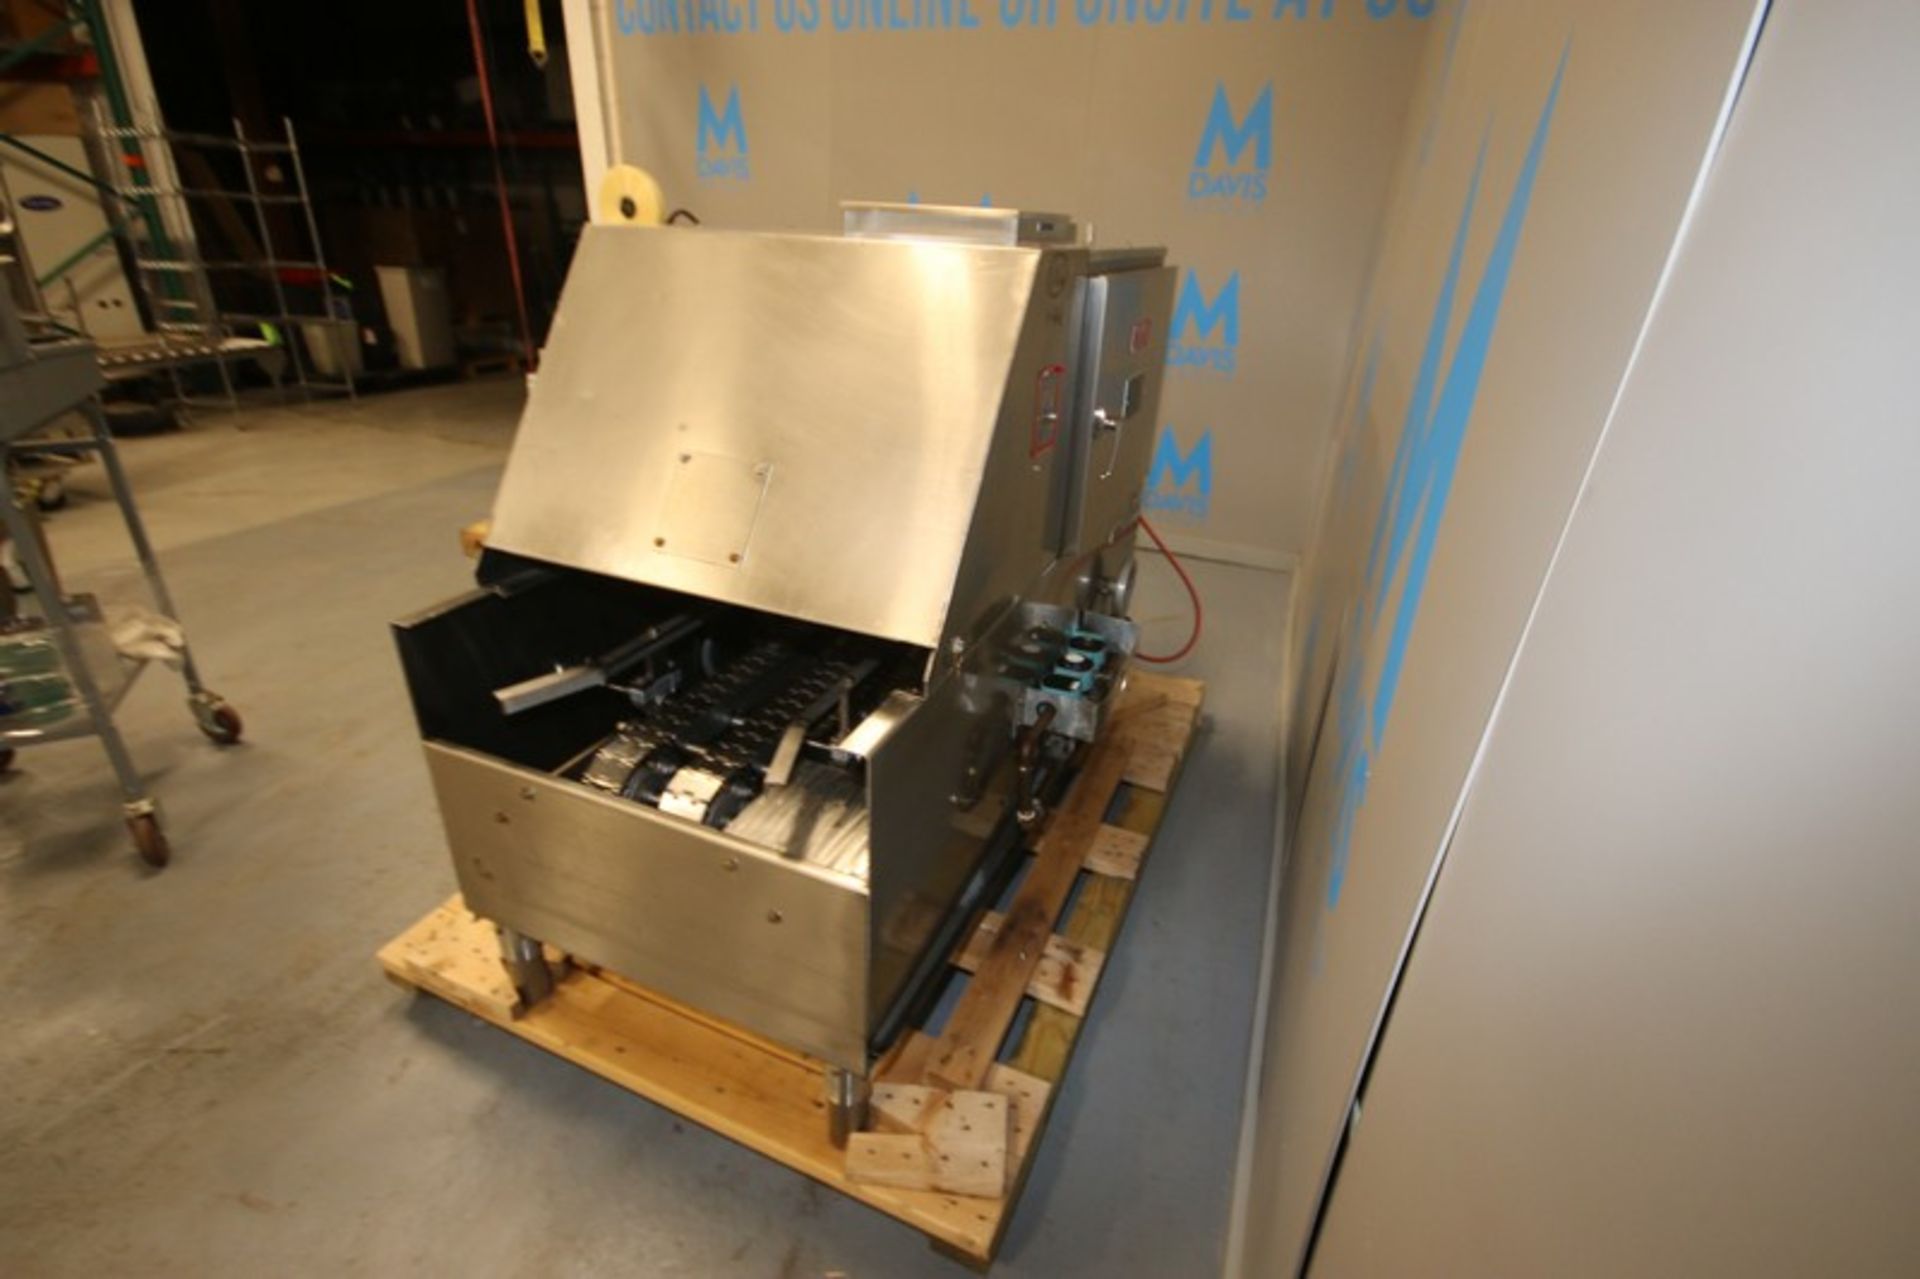 Mallet S/S Bread Pan Oiler,M/N 2001A, S/N 243-456, 460 Volts, 3 Phase, with Casters (INV#77729)( - Image 9 of 11